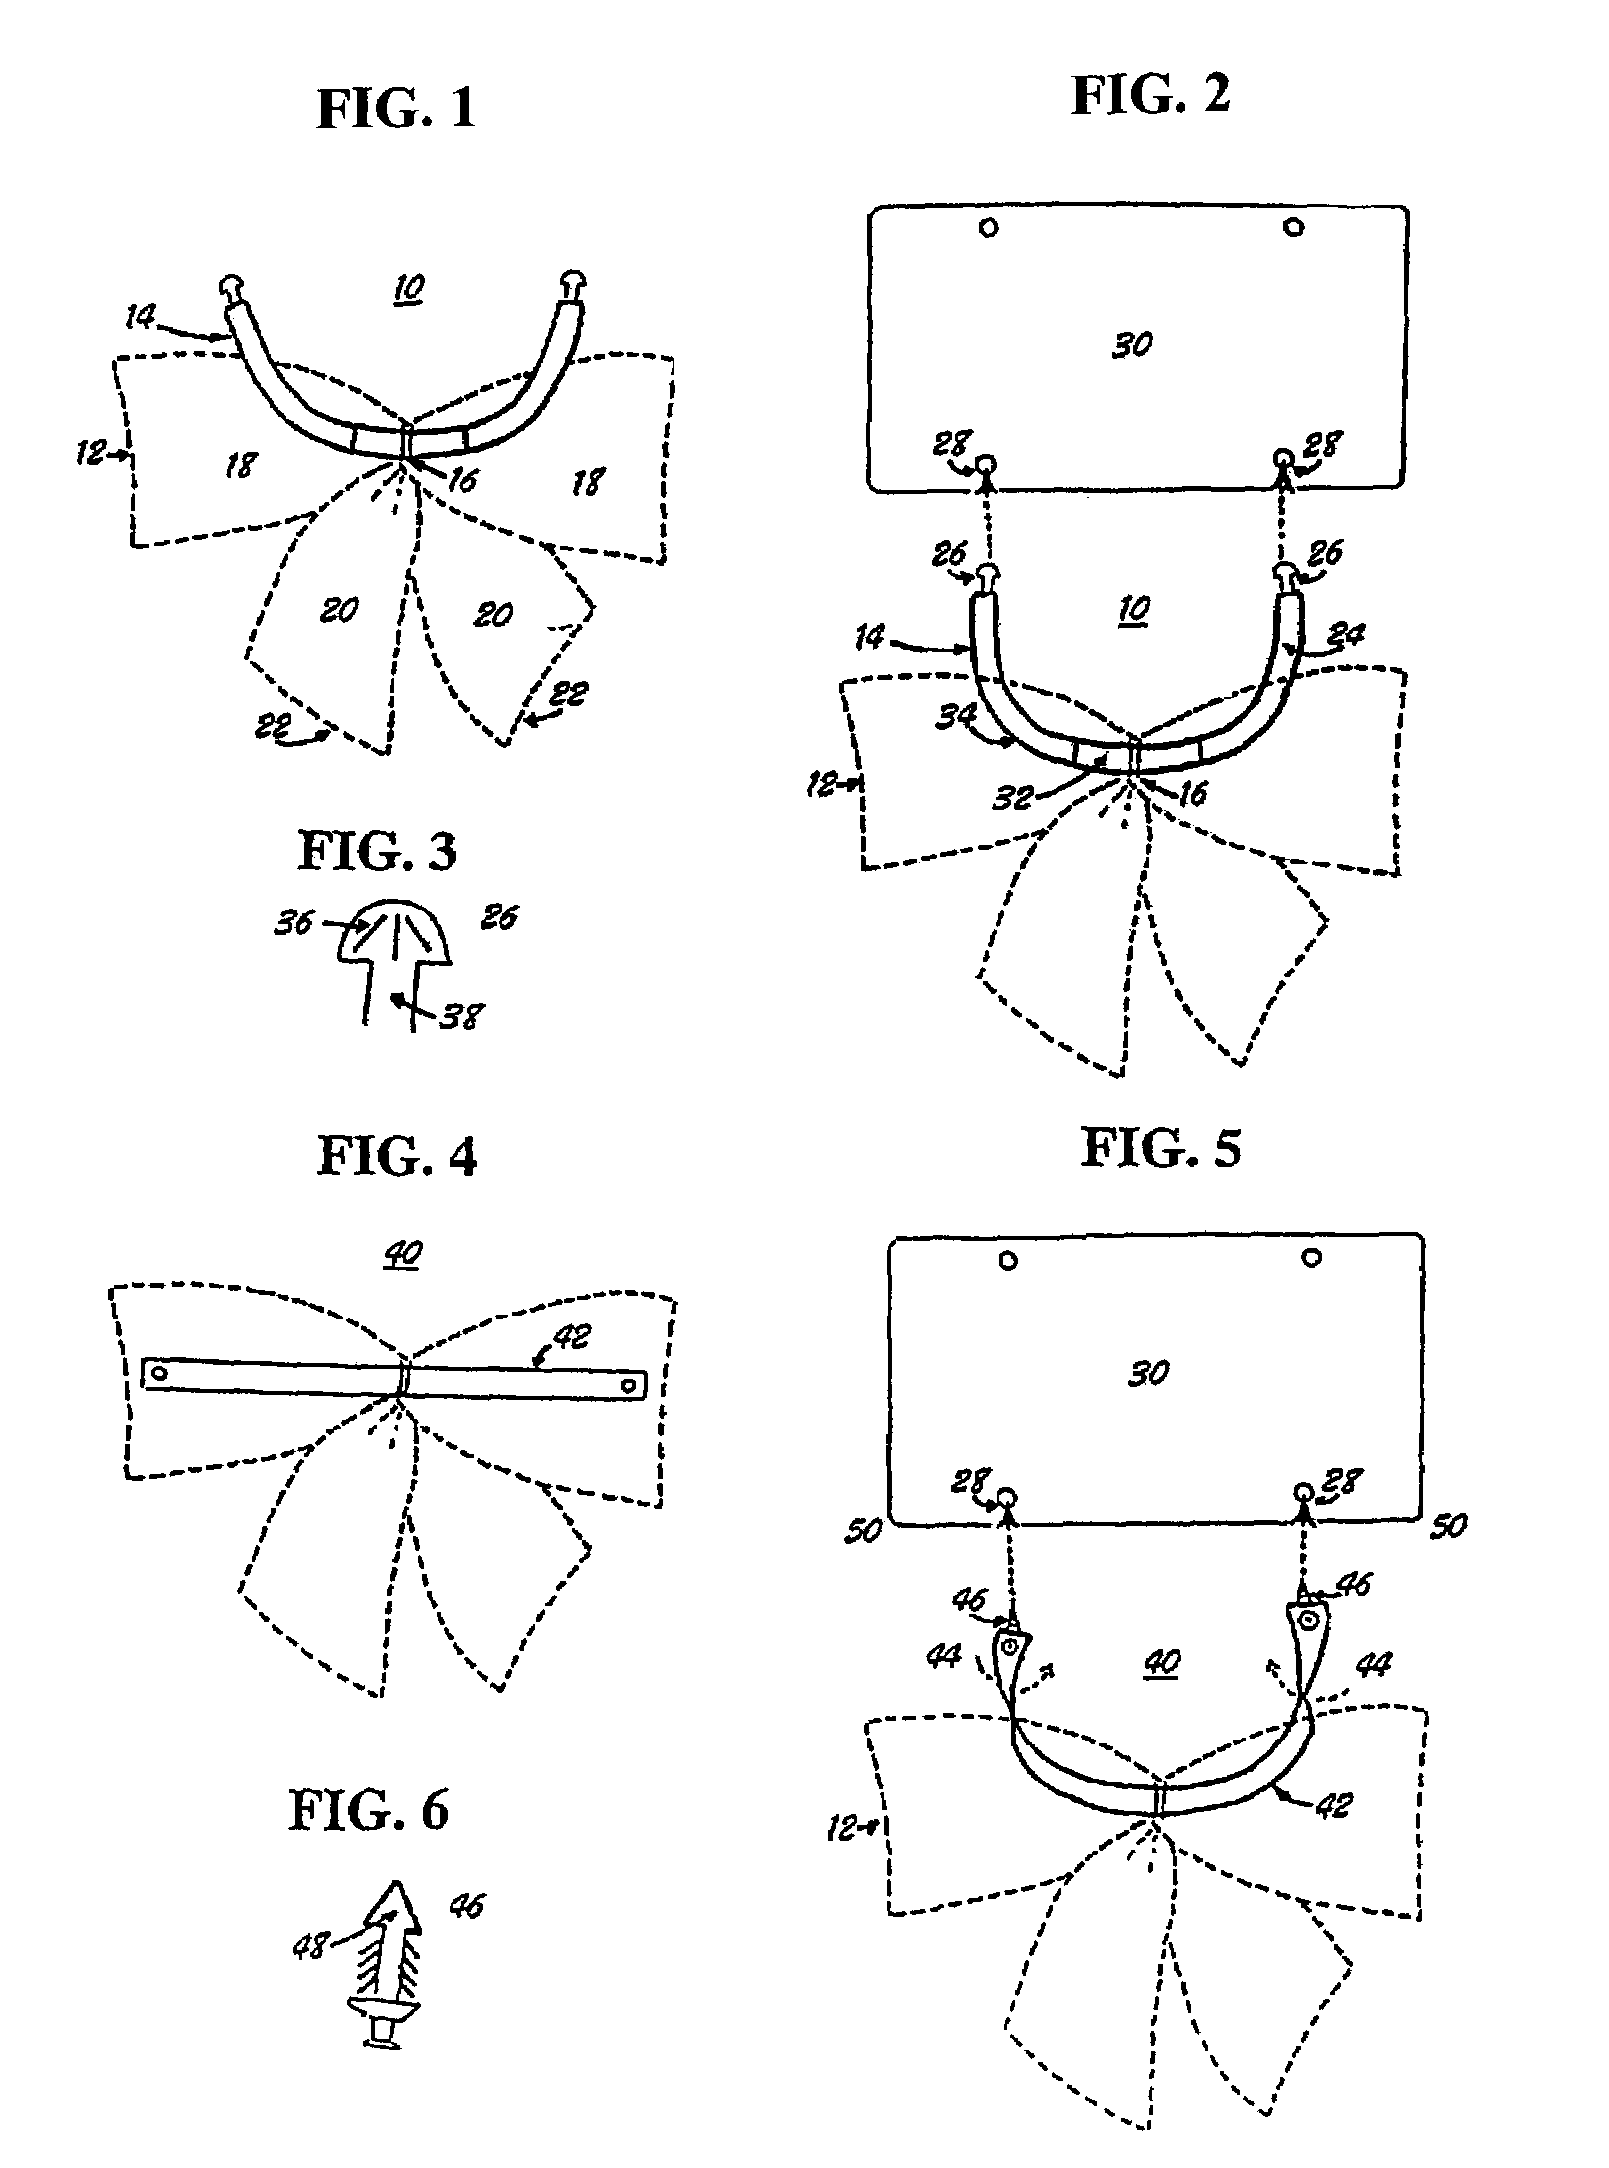 Attachment for decorative objects for vehicles